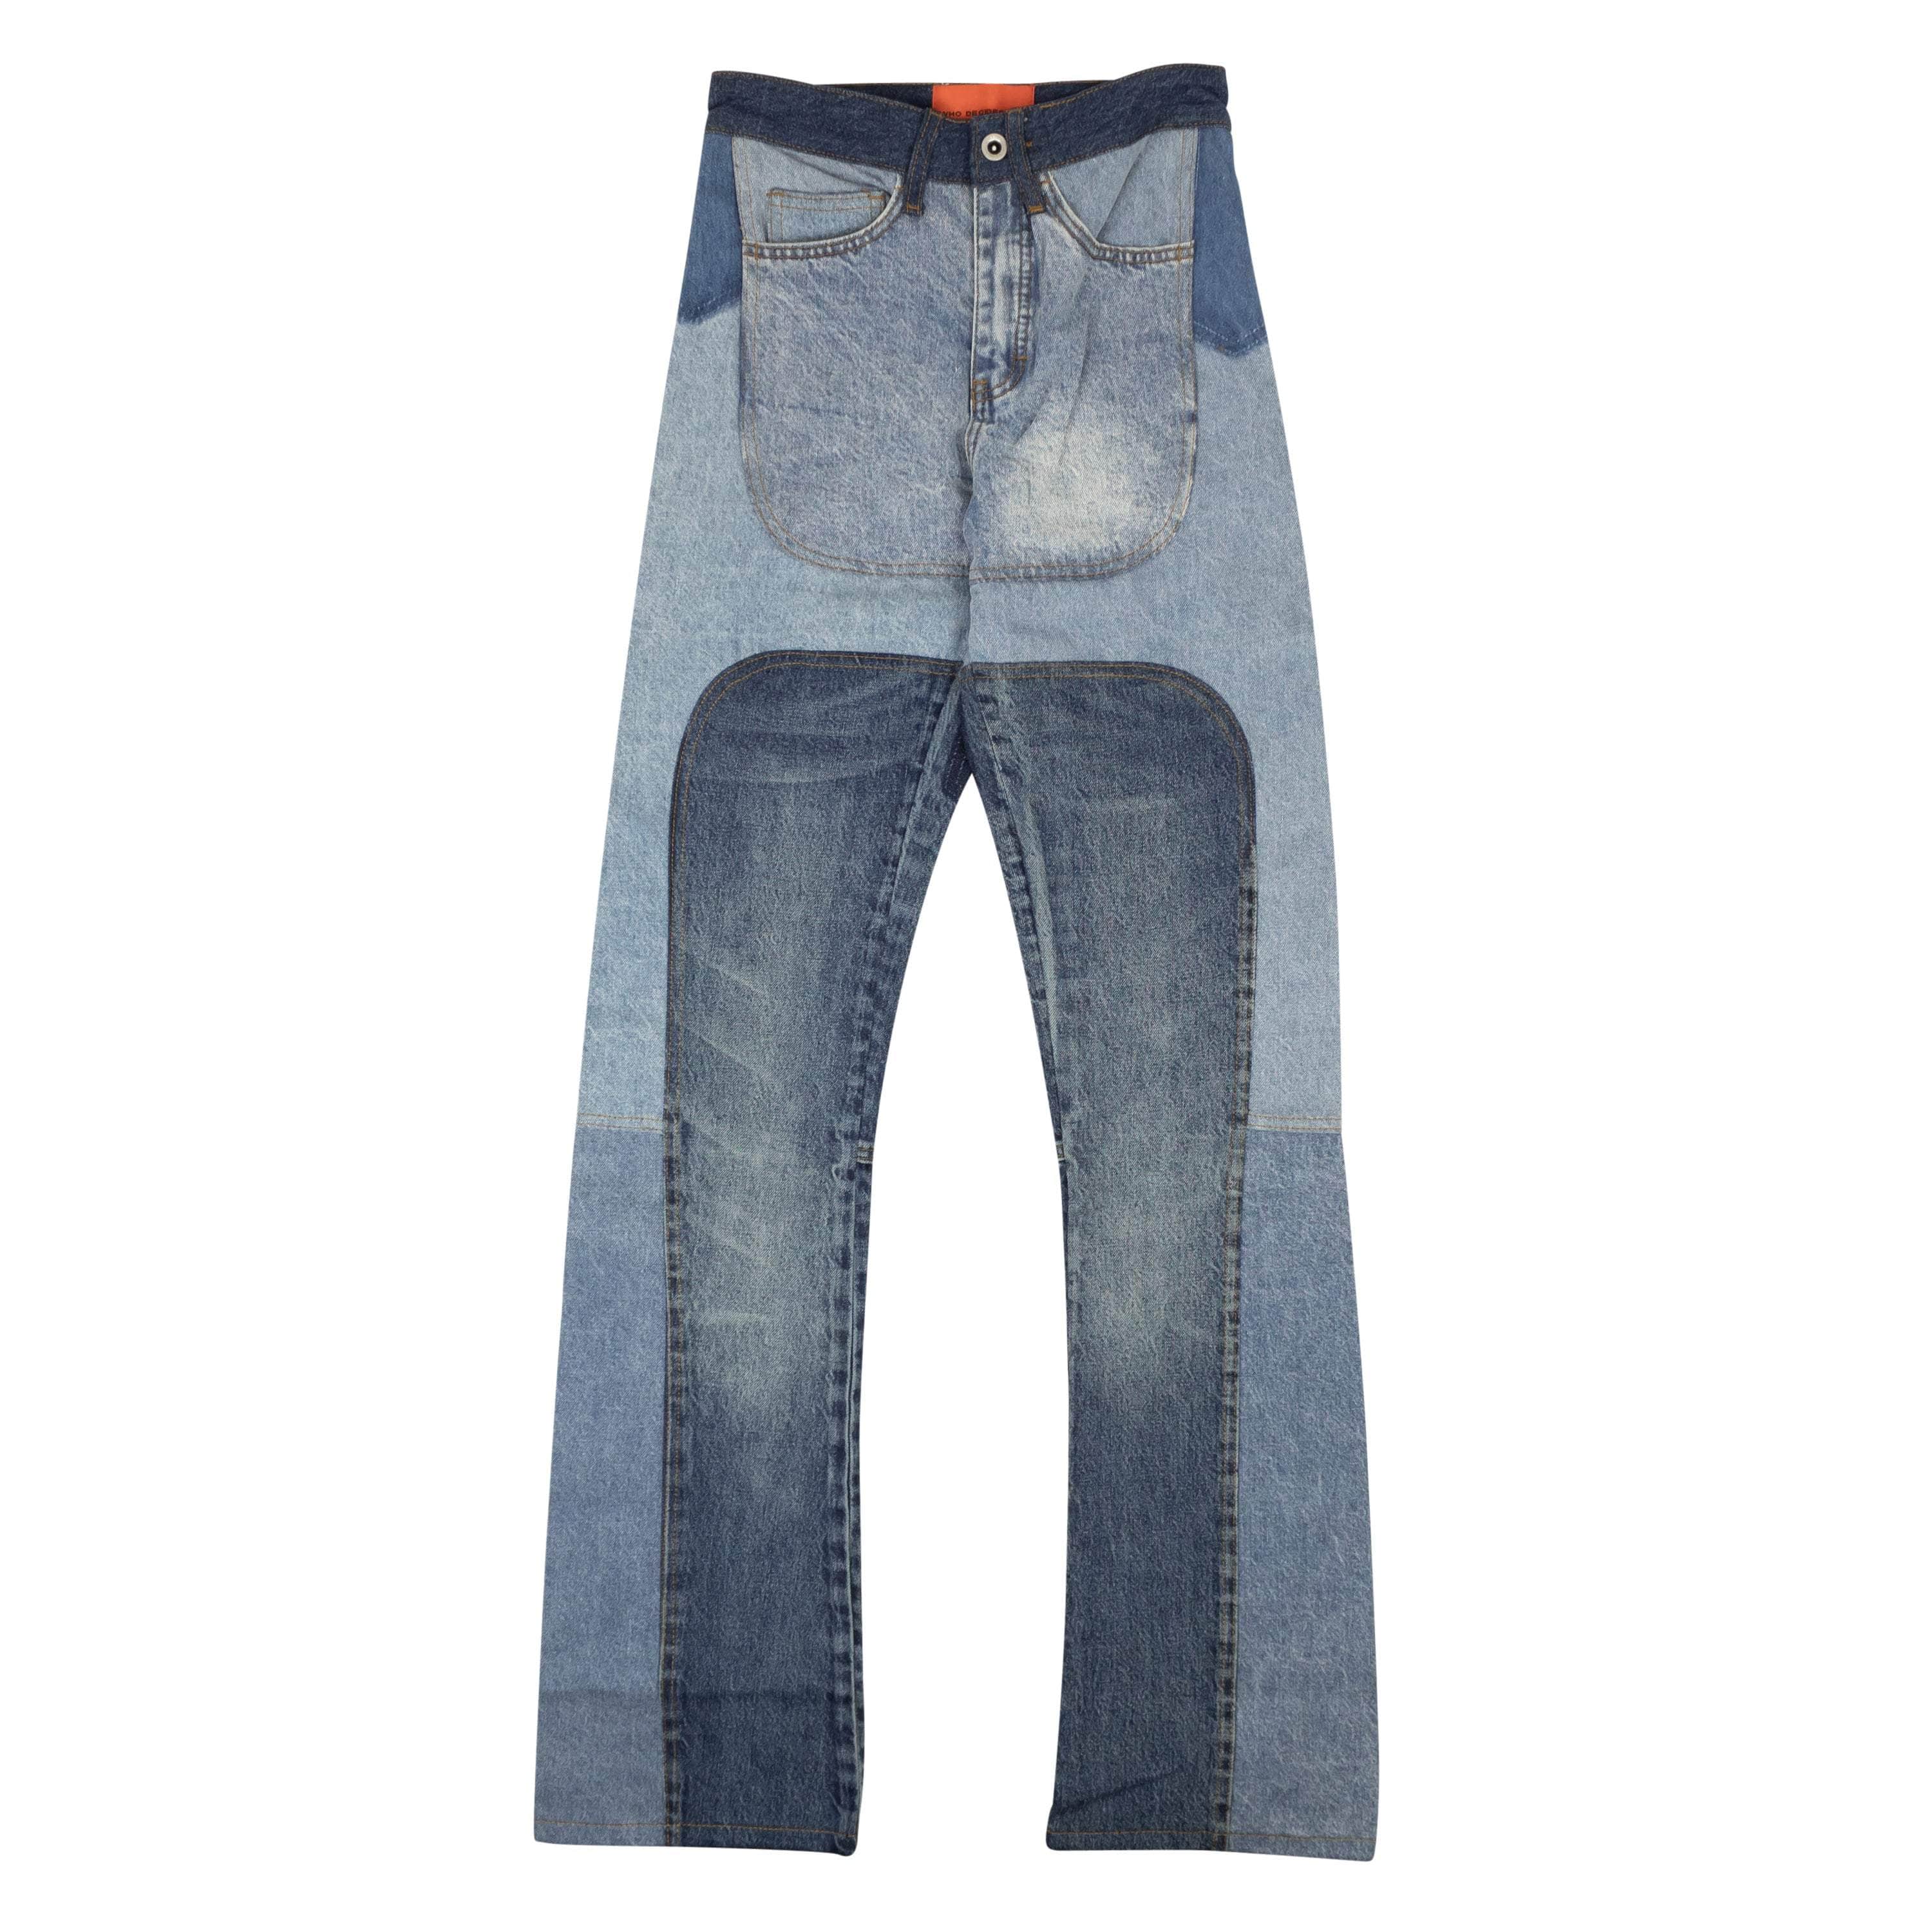 Who Decides War 500-750, channelenable-all, chicmi, couponcollection, gender-mens, main-clothing, mens-shoes, mens-straight-fit-jeans, size-24, size-26, size-28, size-30, who-decides-war Indigo Upcycled Patchwork Denim Jeans